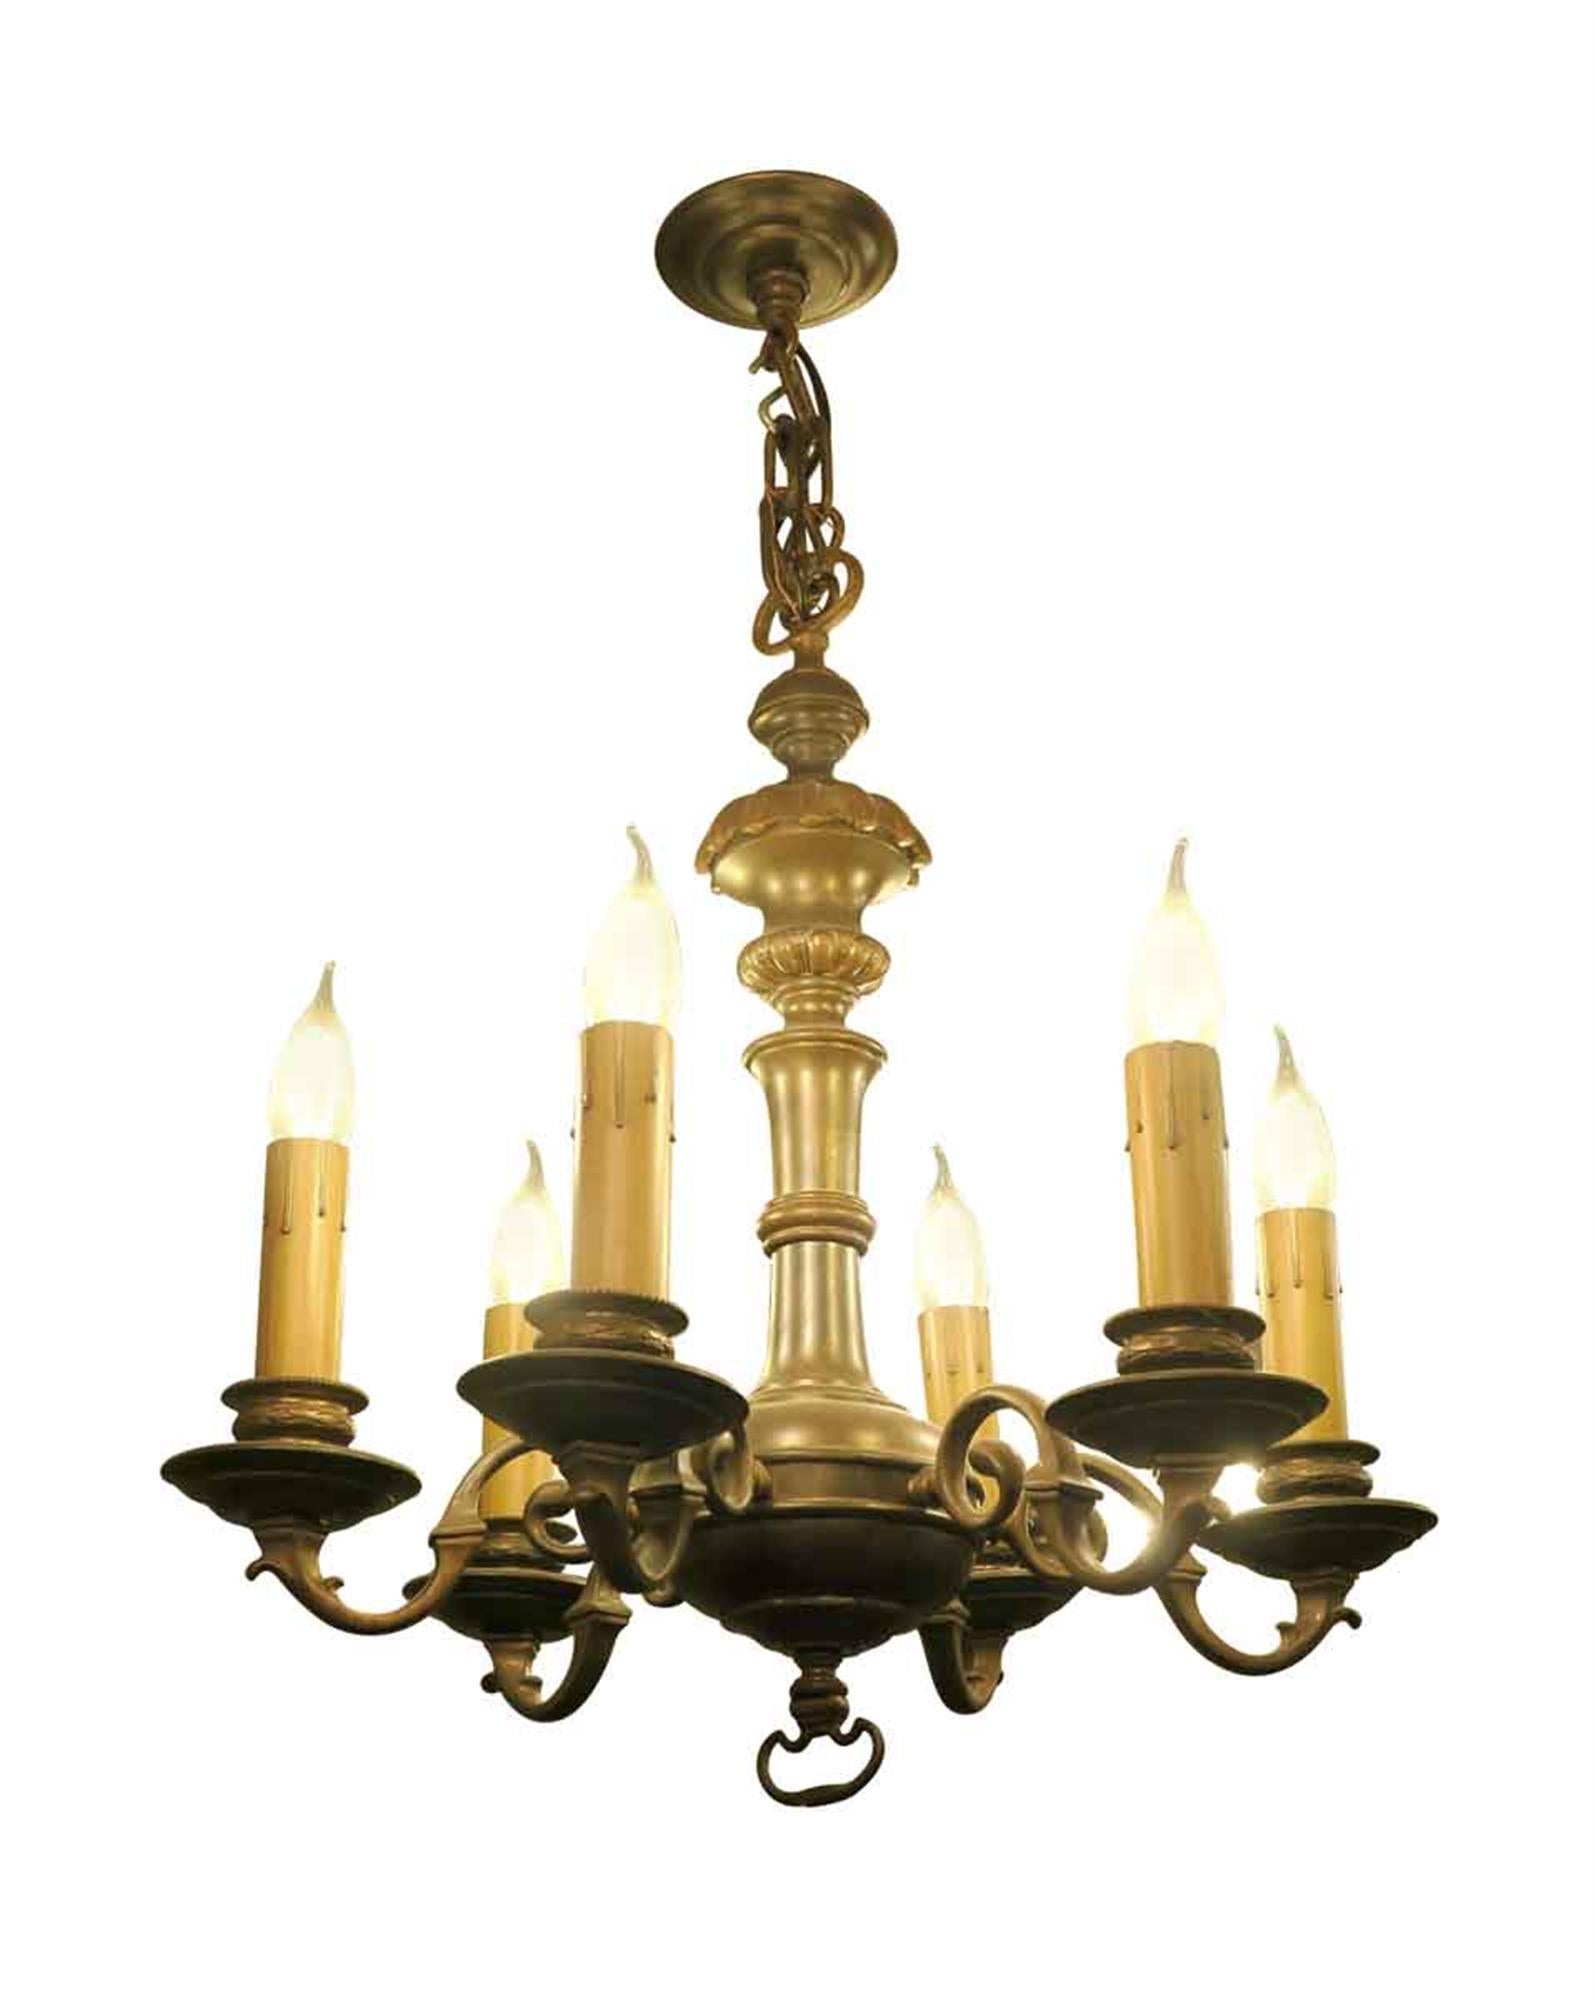 Bronze six-arm and lights Georgian style chandelier with a beautiful patina. American made in 1910. 